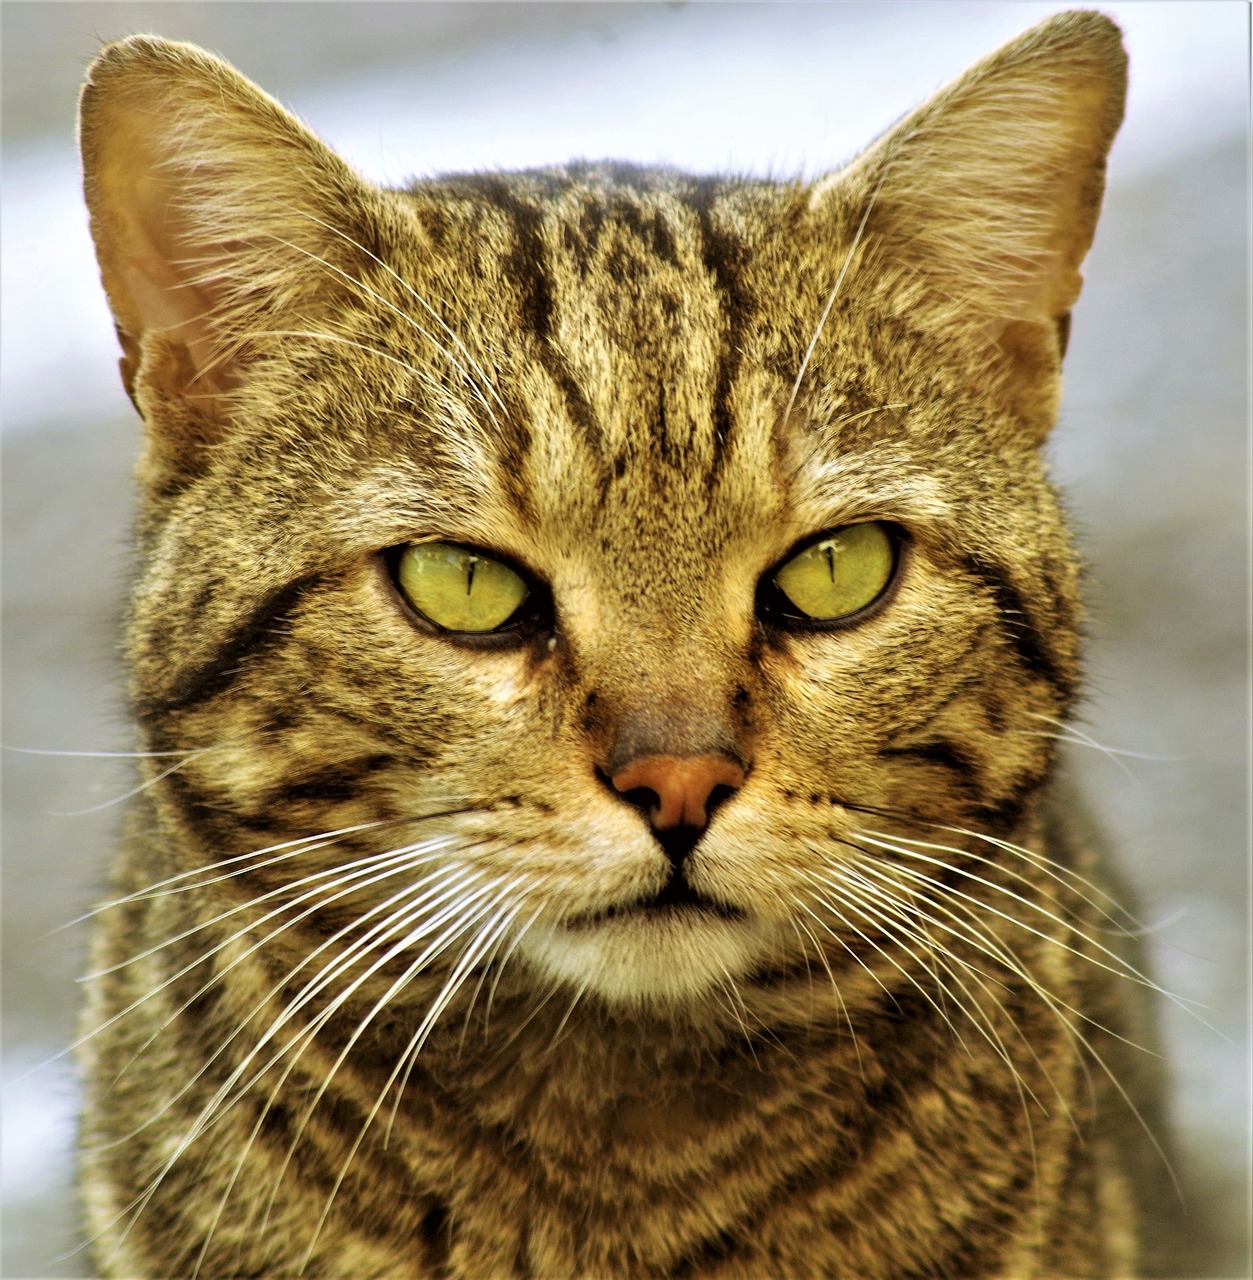 a close up of a cat with green eyes, by Robert Brackman, flickr, sigma 85/1.2 portrait, his eyes glowing yellow, proud serious expression, full body close-up shot